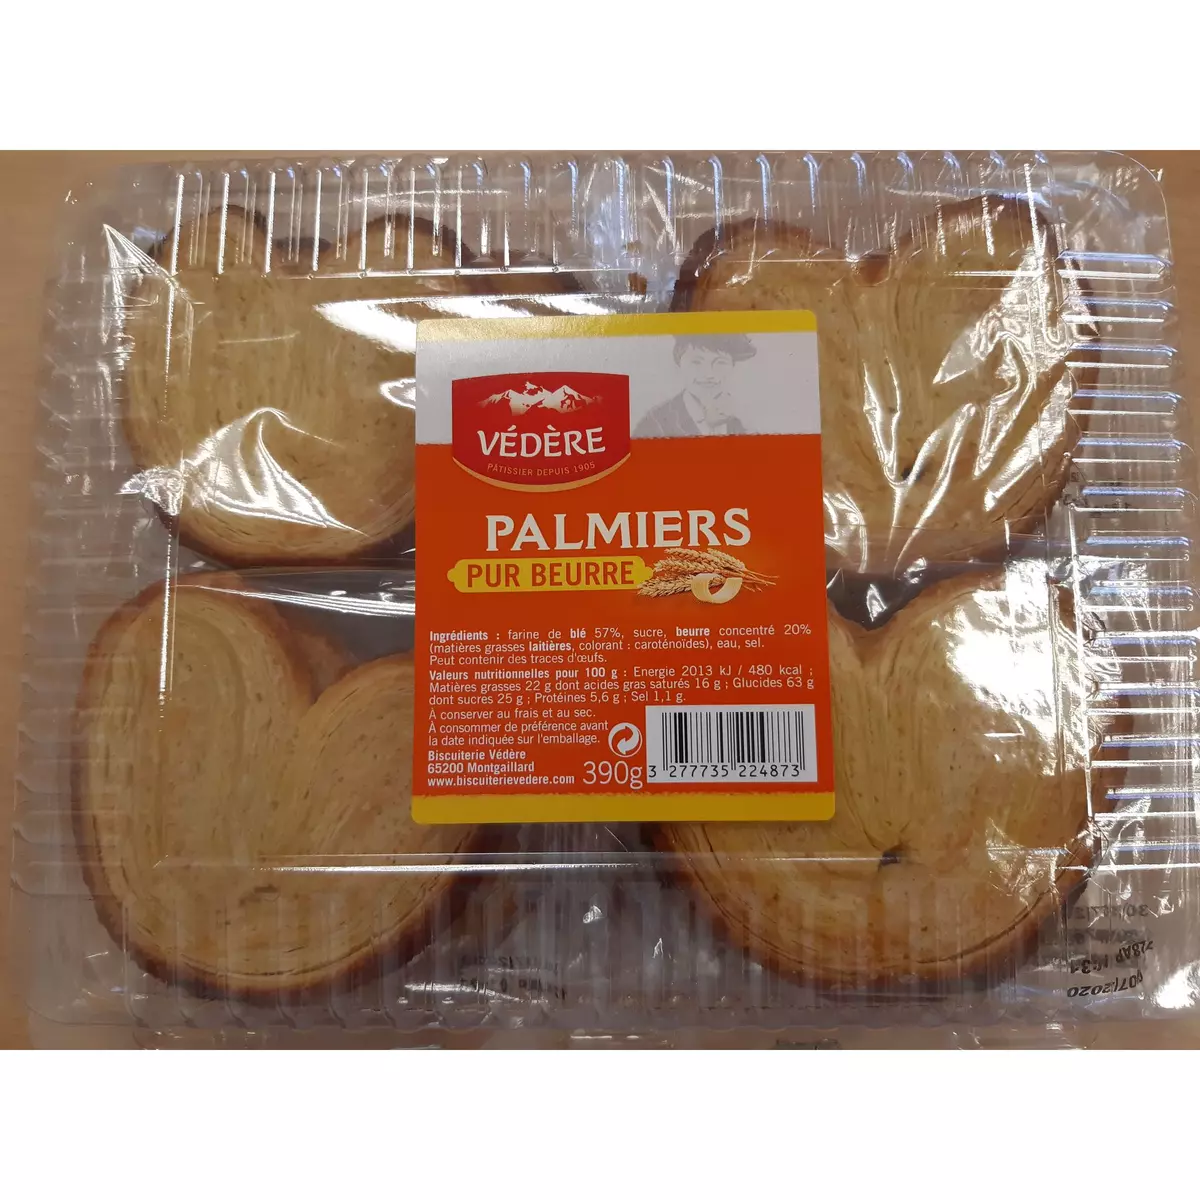 VEDERE Palmiers pur beurre 390g